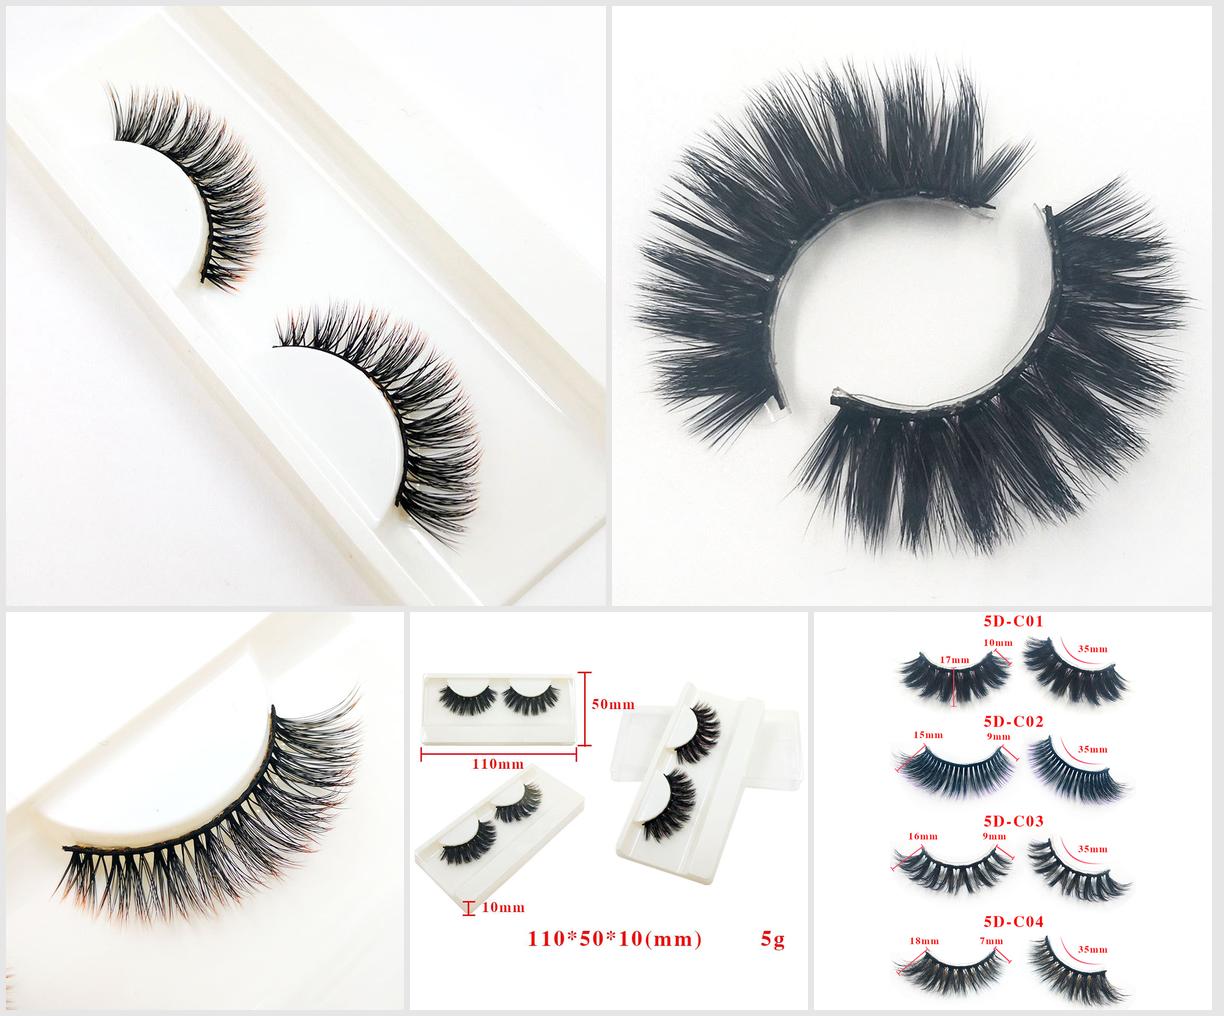 Handmade Soft Faux Mink Eyelash Extensions Thick Crossover Lashes Cruelty Free 3D Faux Mink Strip Eyelashes